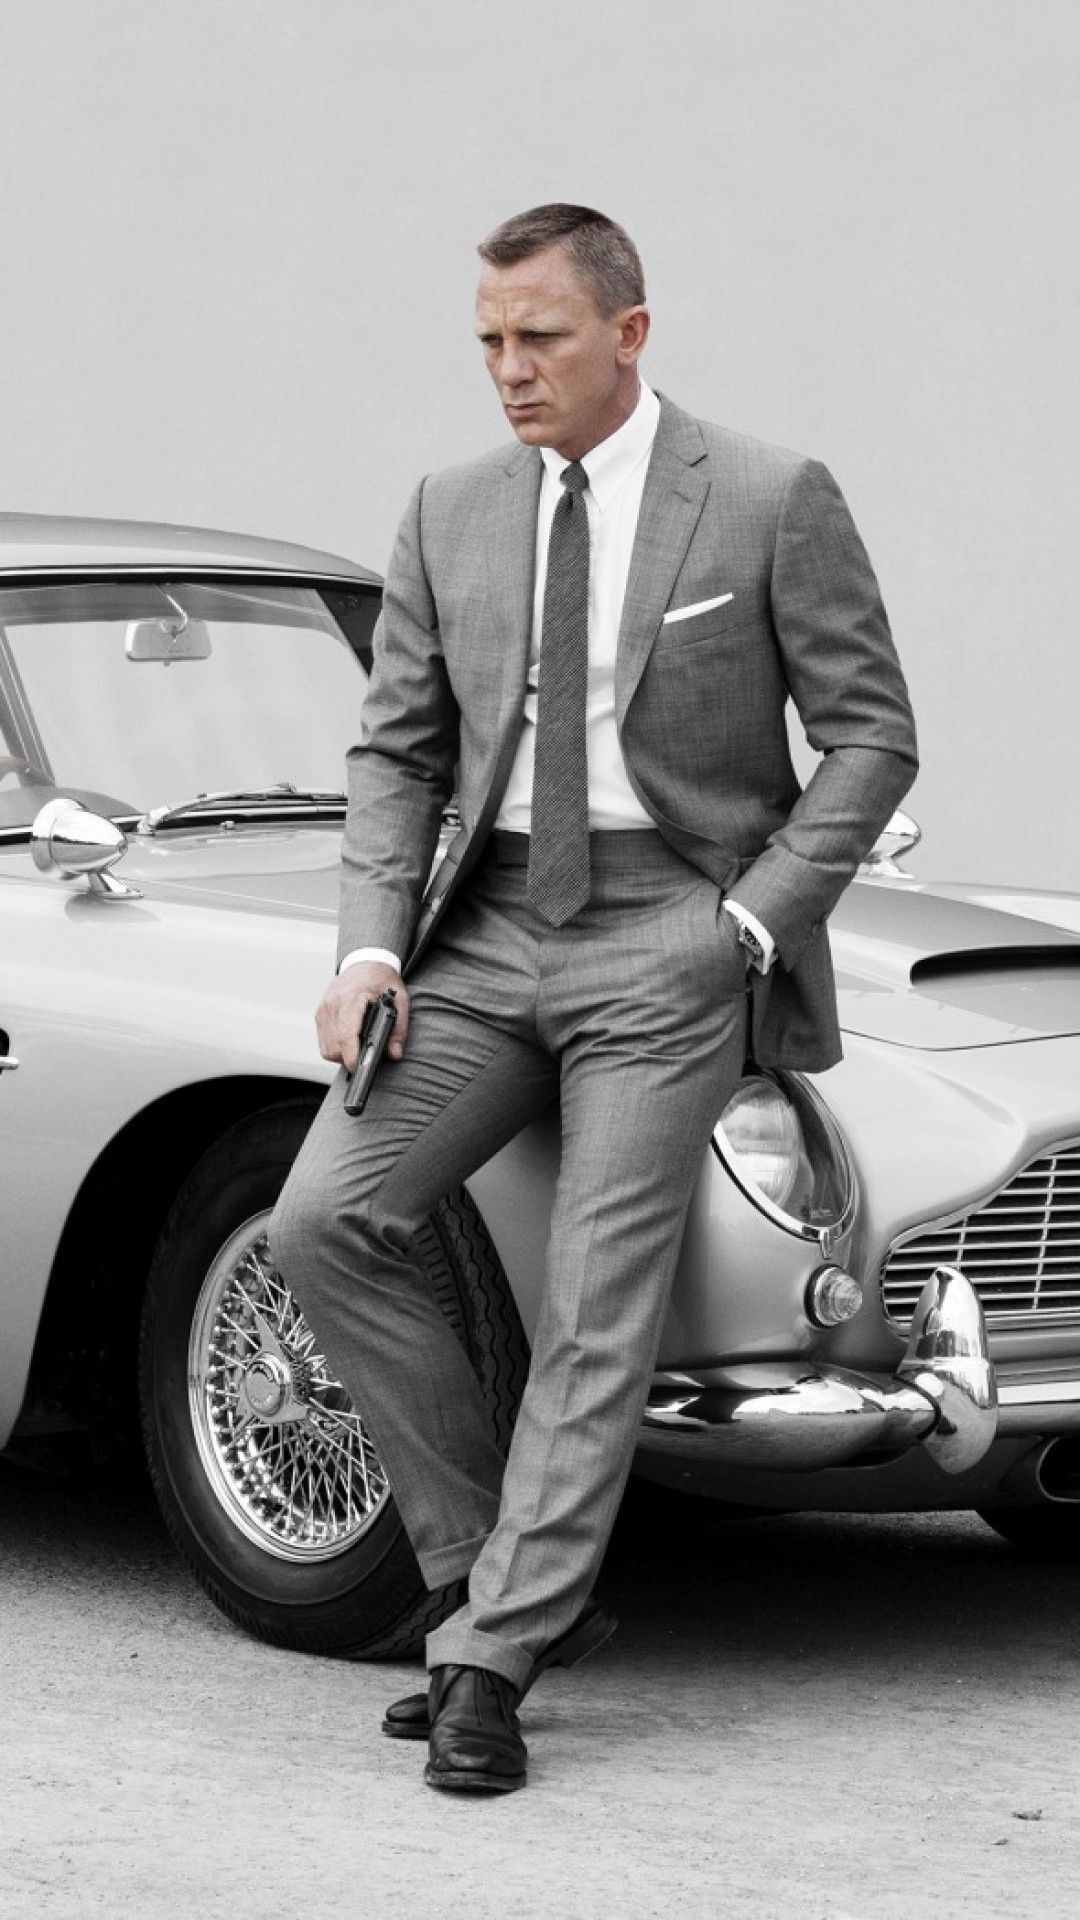 Daniel Craig: An acclaimed actor who graduated from the prestigious Guildhall School of Music and Drama. 1080x1920 Full HD Background.